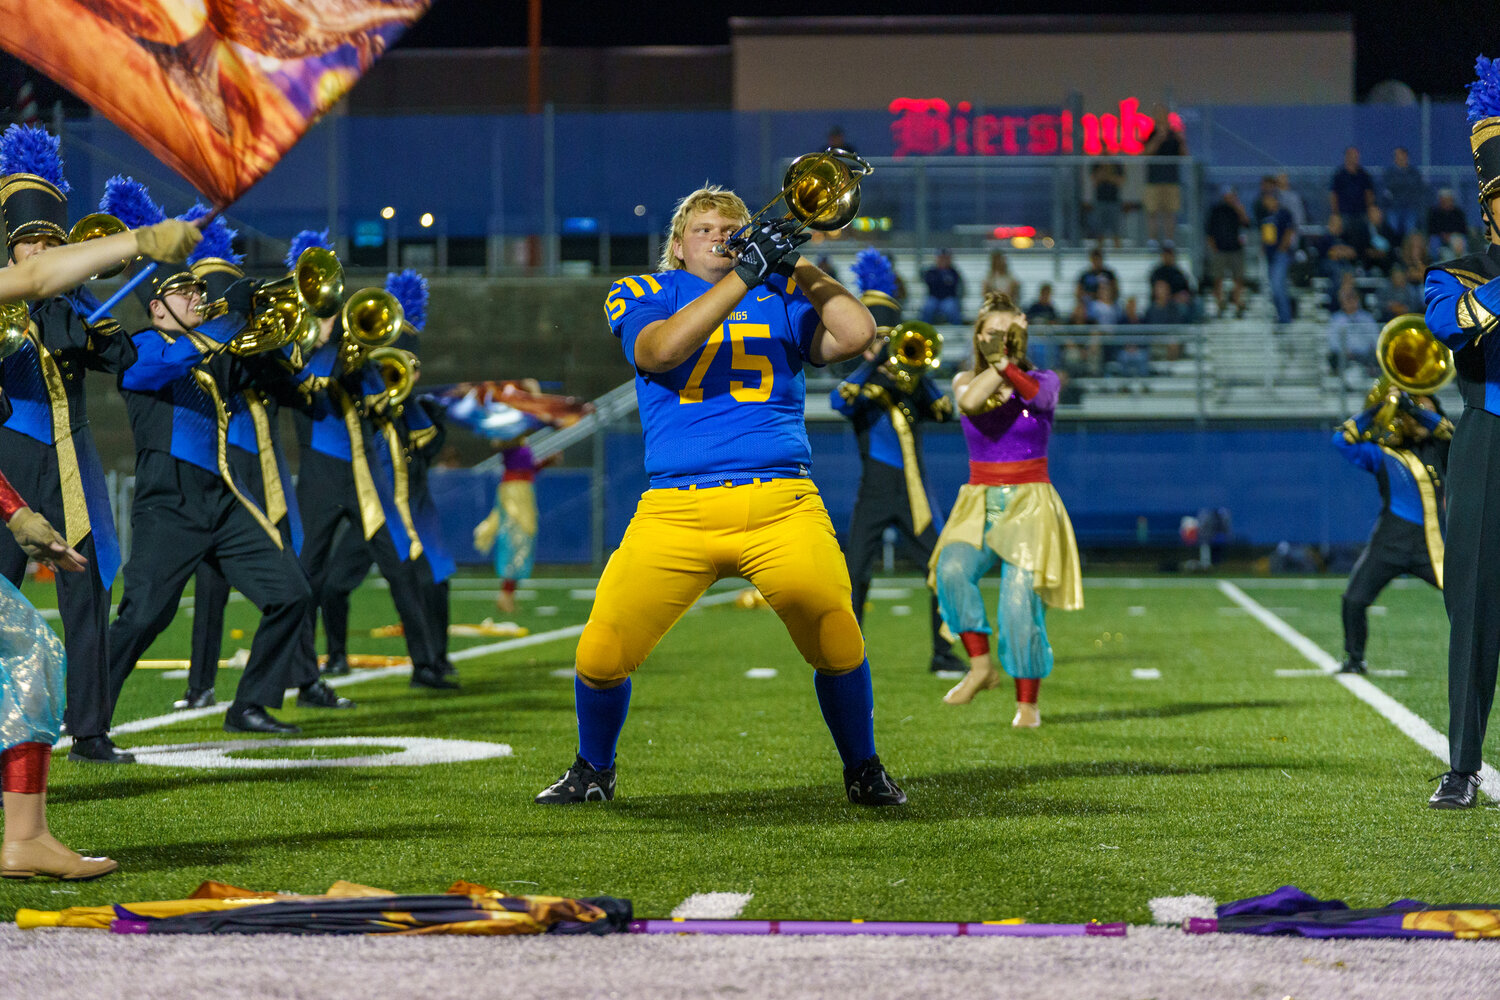 Elliot Renneke was pulling double duty Thursday night at the football game against Mahtomedi. He was there for both football and marching band where he played with his bandmates in his football uniform with the support of his football coaches and band instructors.